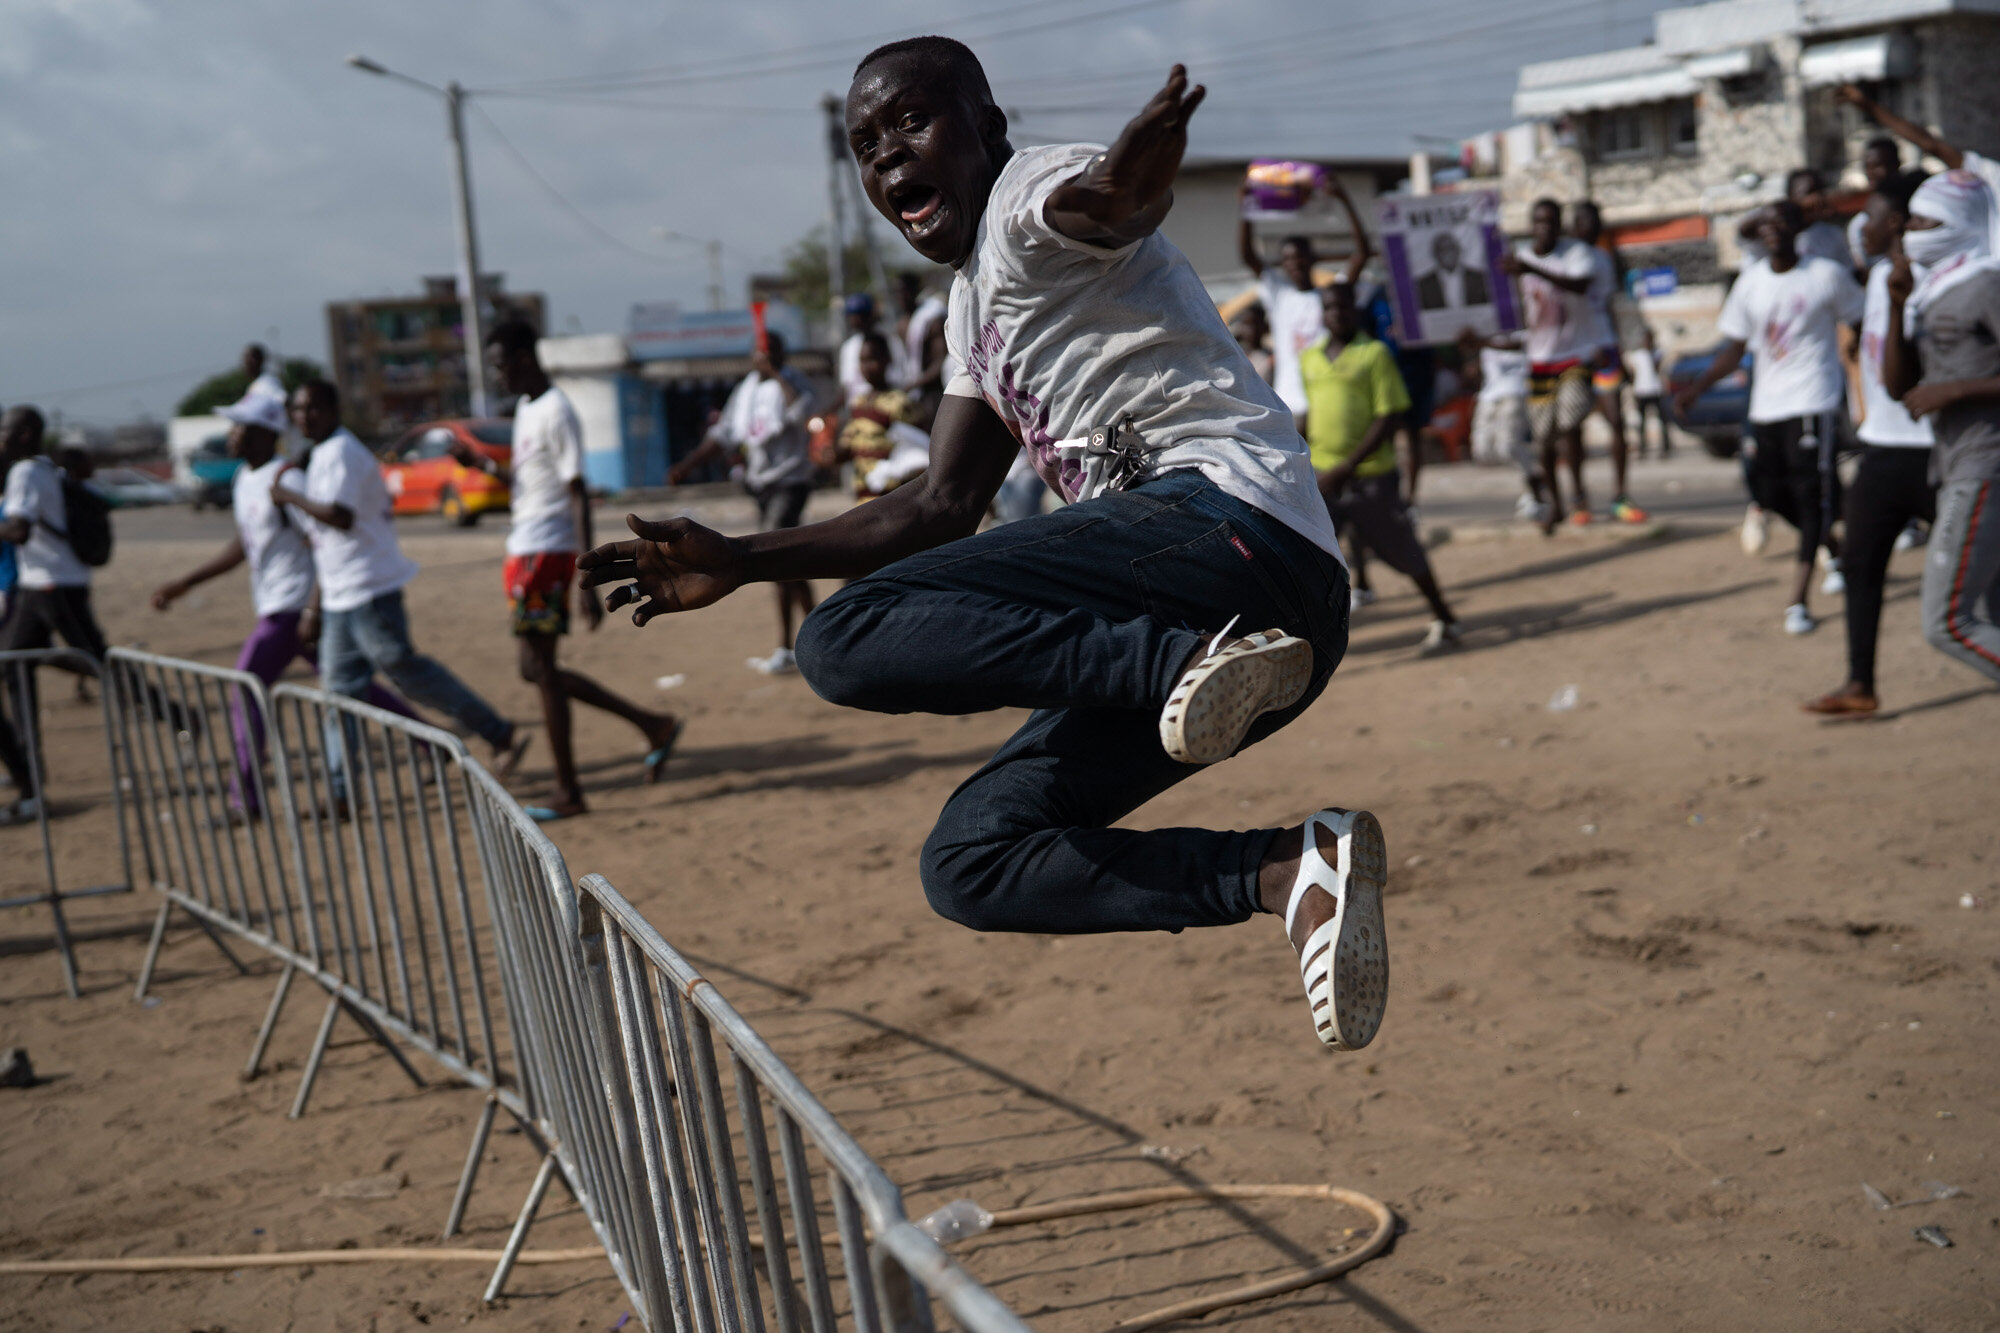  A supporter of presidential candidate Kouadio Konan Bertin jumps a fence as he arrives at Bertin’s final campaign rally in Abidjan, Ivory Coast, on Oct. 29, 2020, ahead of the Oct. 31 election. (AP Photo/Leo Correa) 